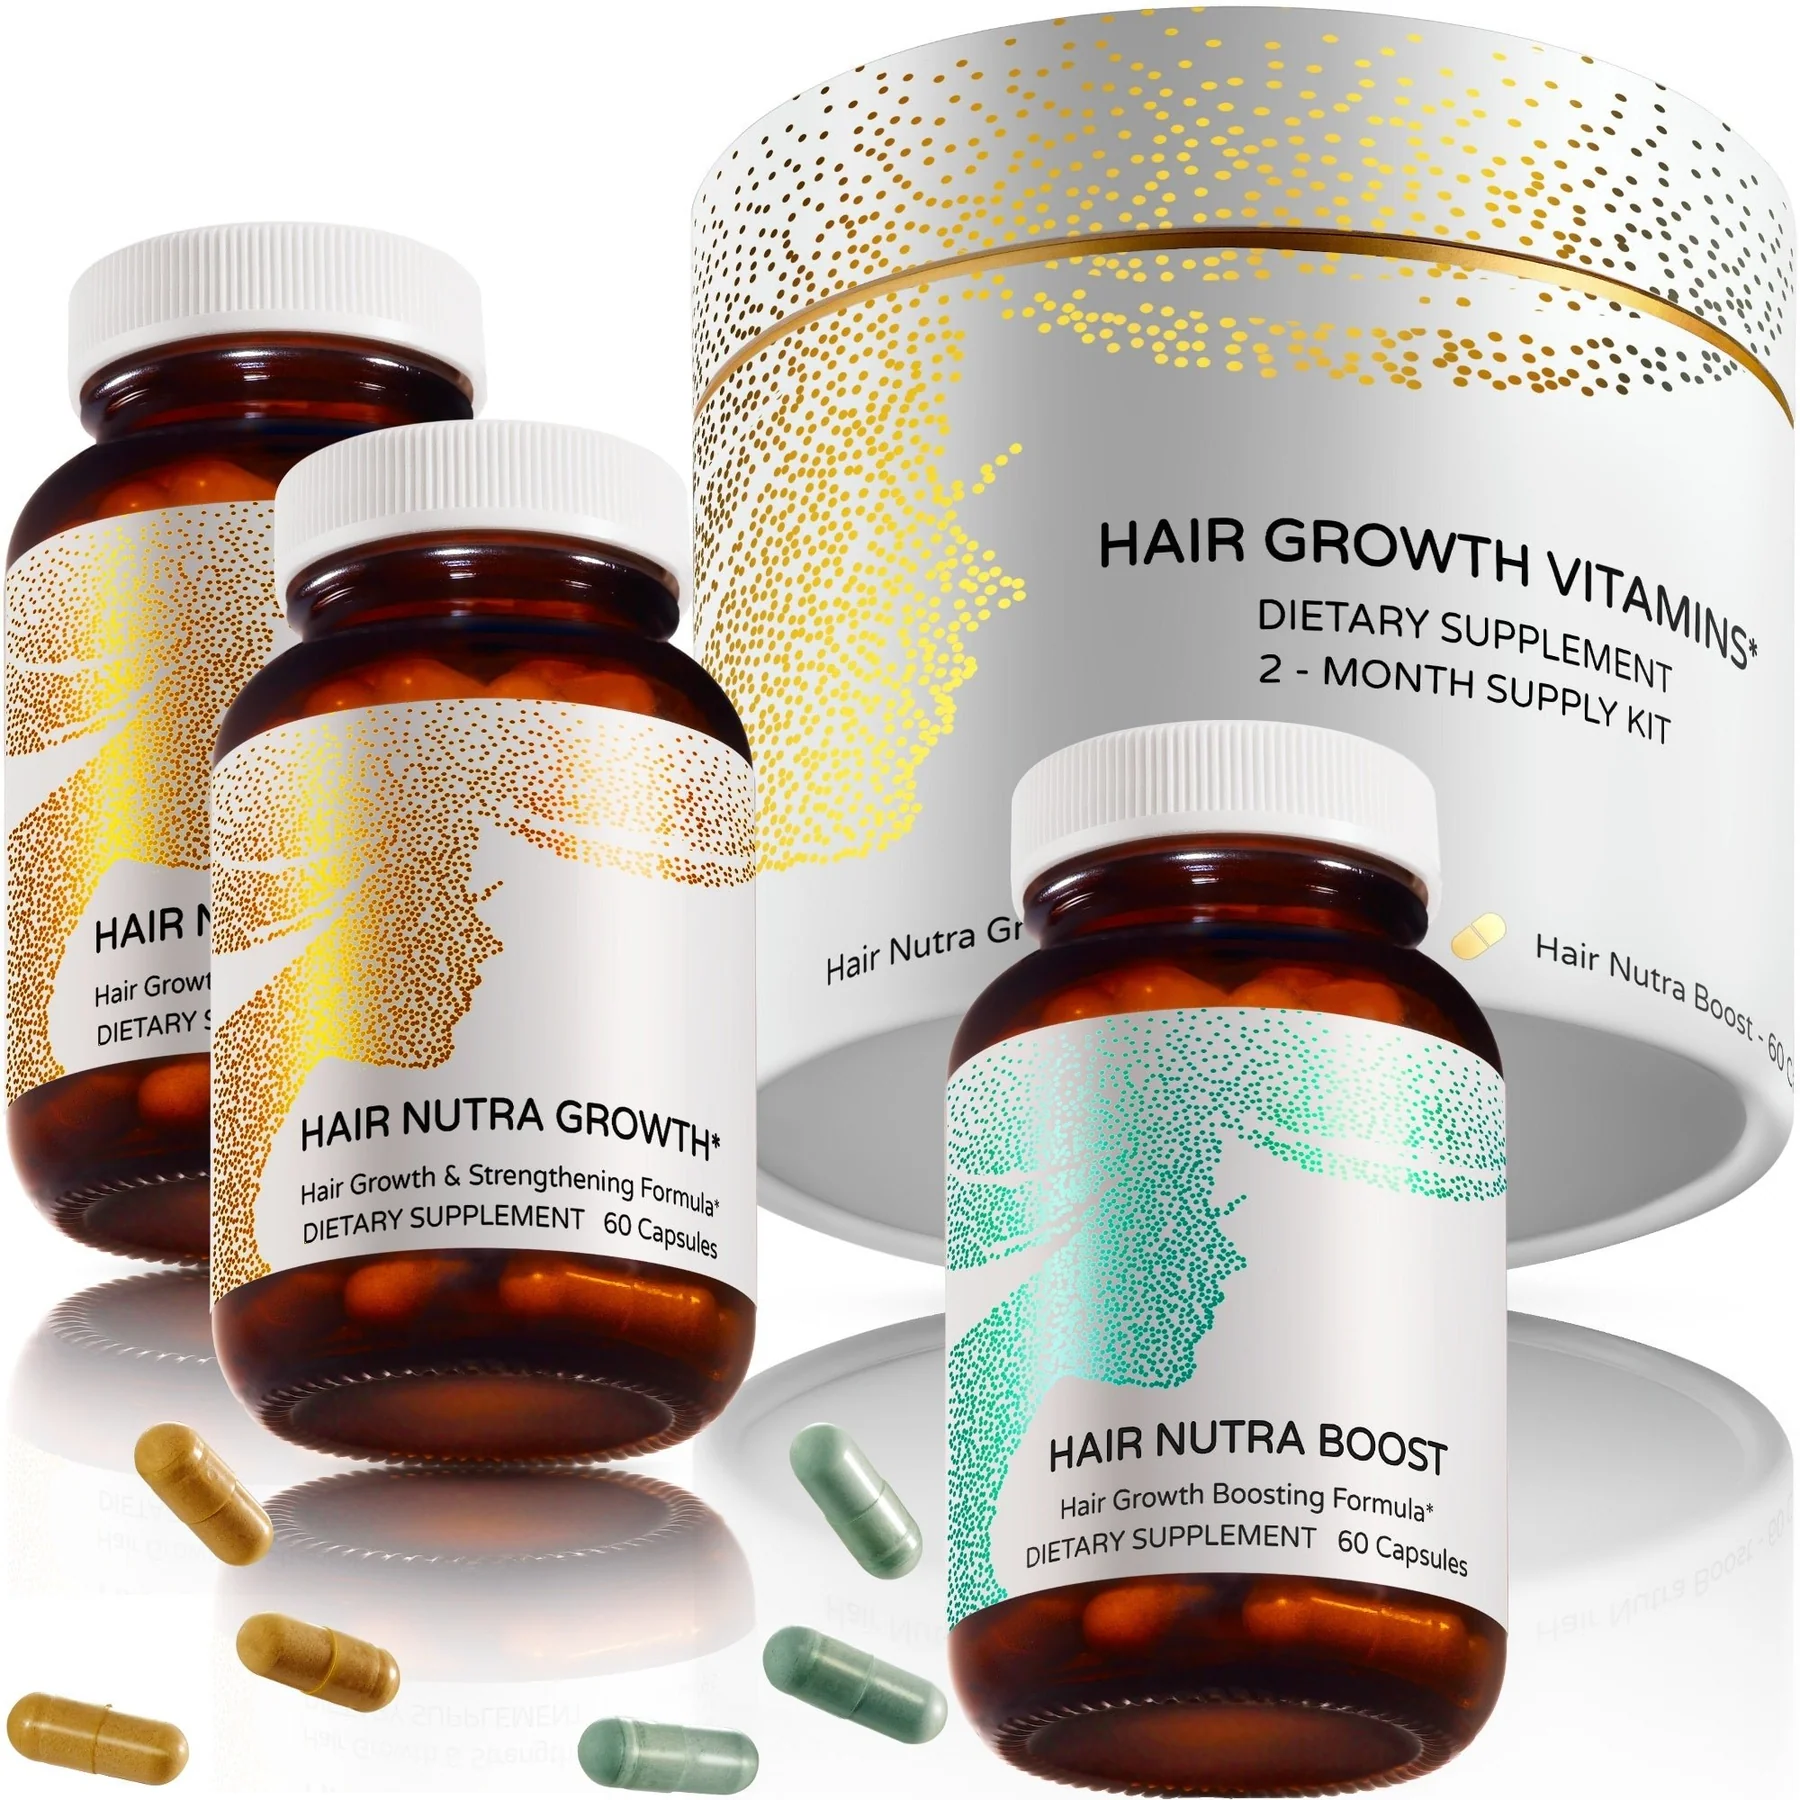 Clinically Tested Hair Growth Vitamins for Women - Advanced Supplement System - 2 Month Supply Kit